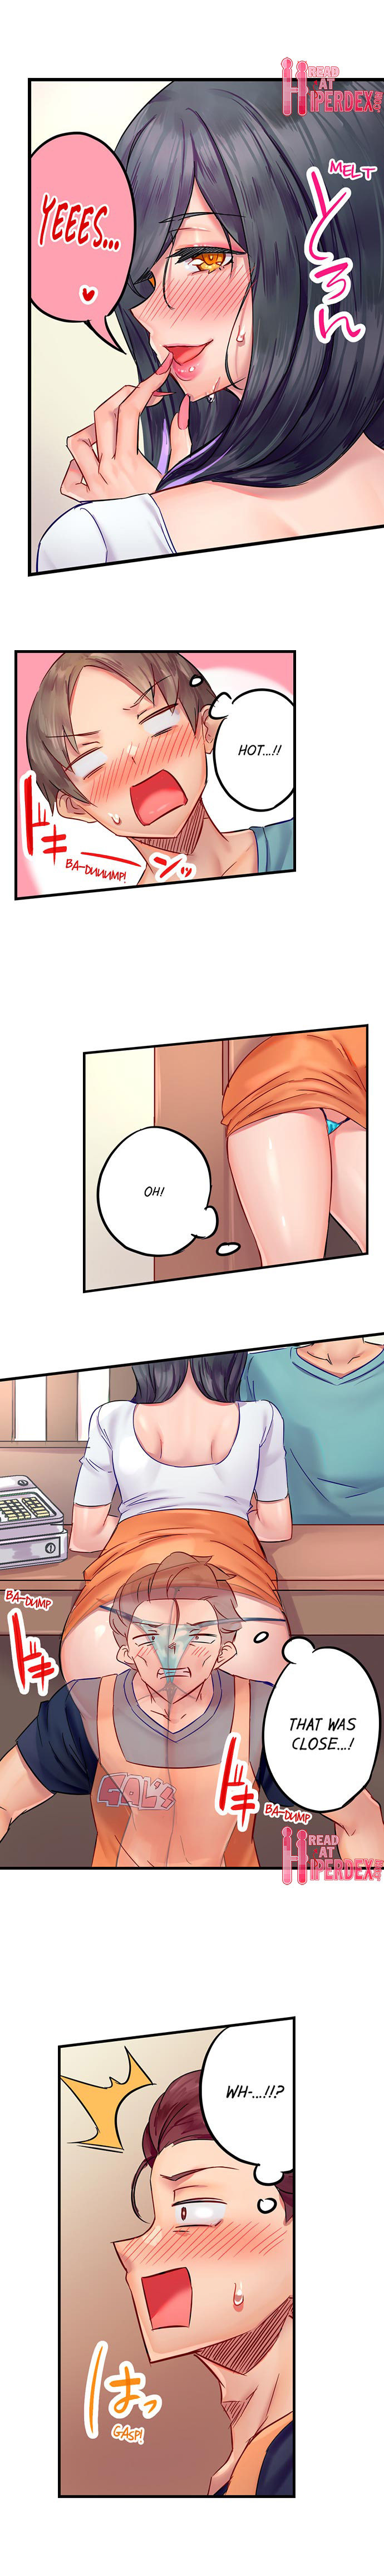 Orgasm Management for This Tanned Girl - Chapter 5 Page 5